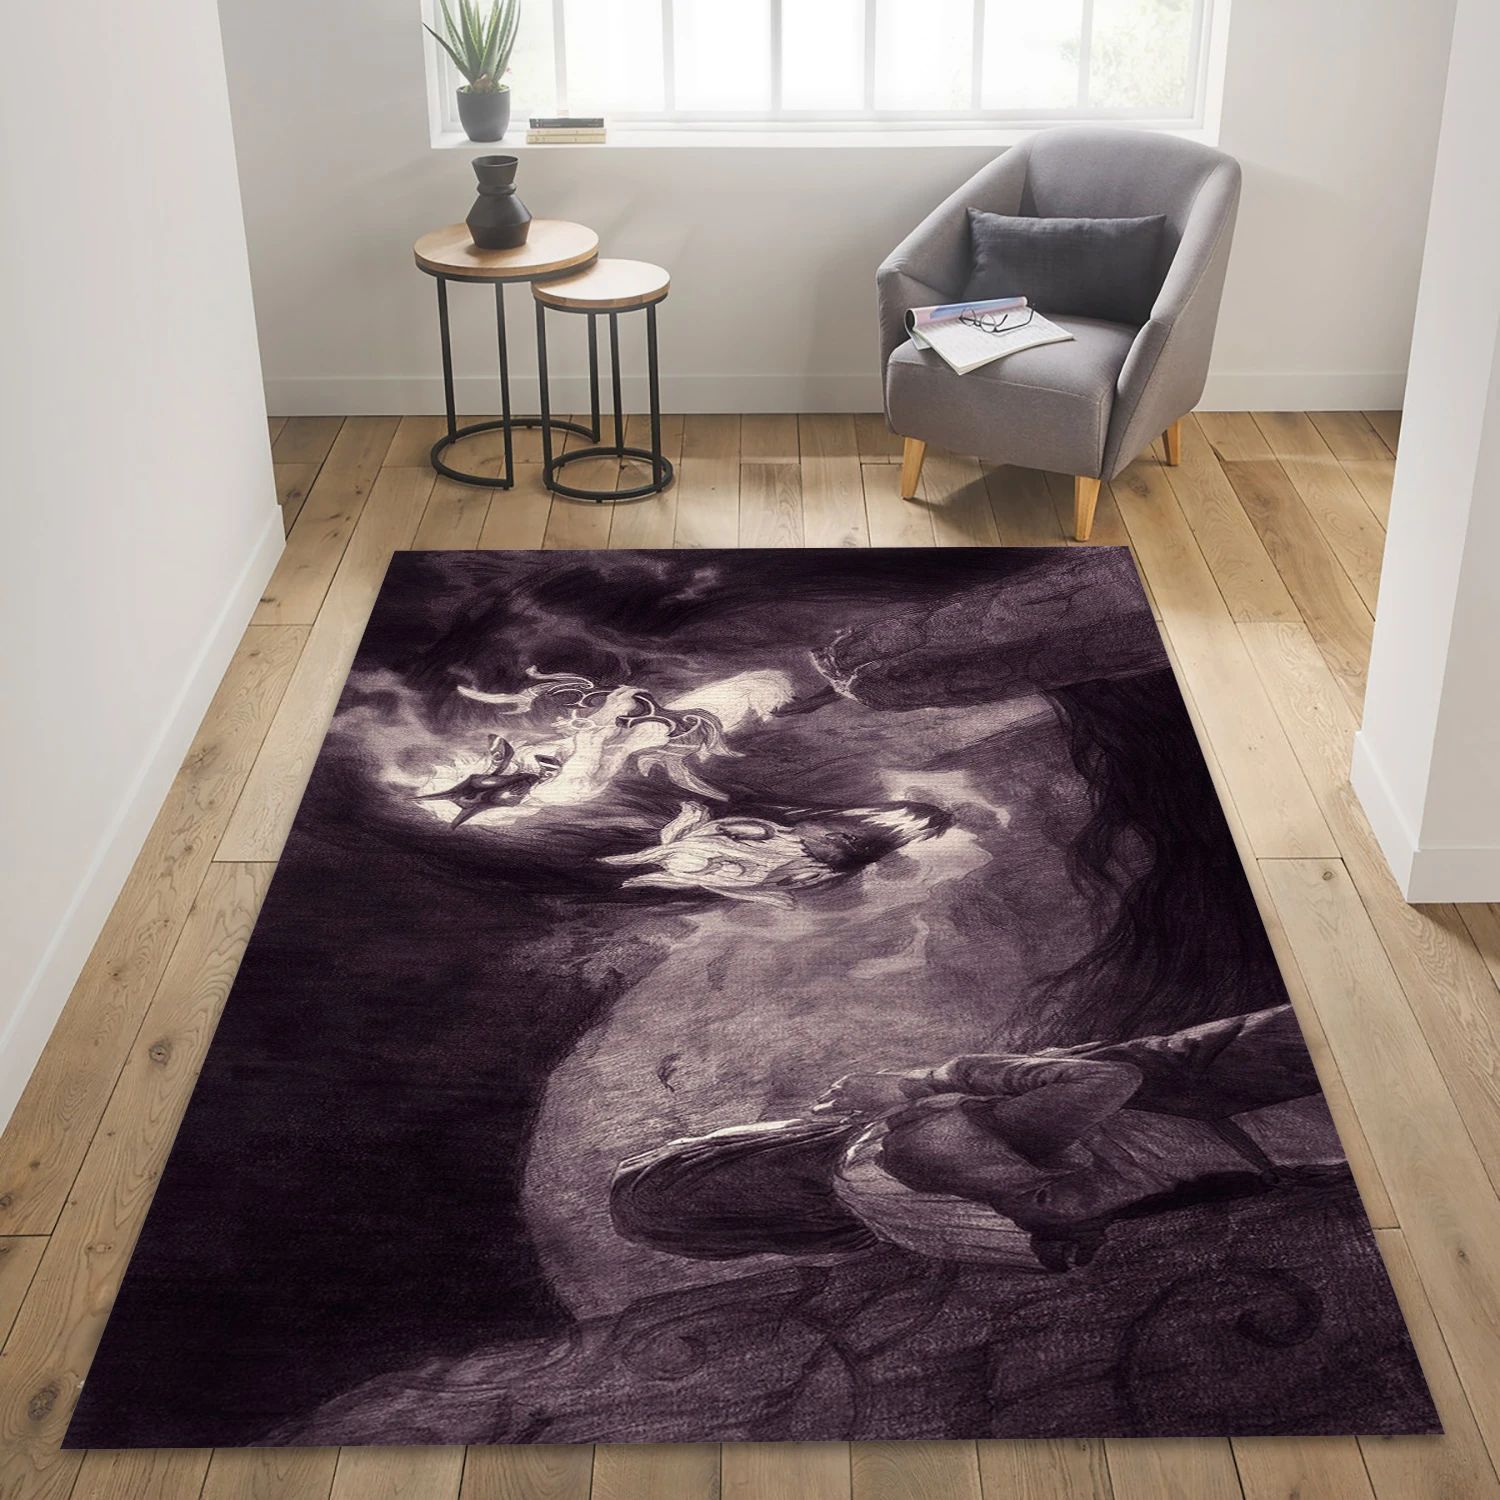 League Of Legends Game Area Rug Carpet, Bedroom Rug - Family Gift US Decor - Indoor Outdoor Rugs 2